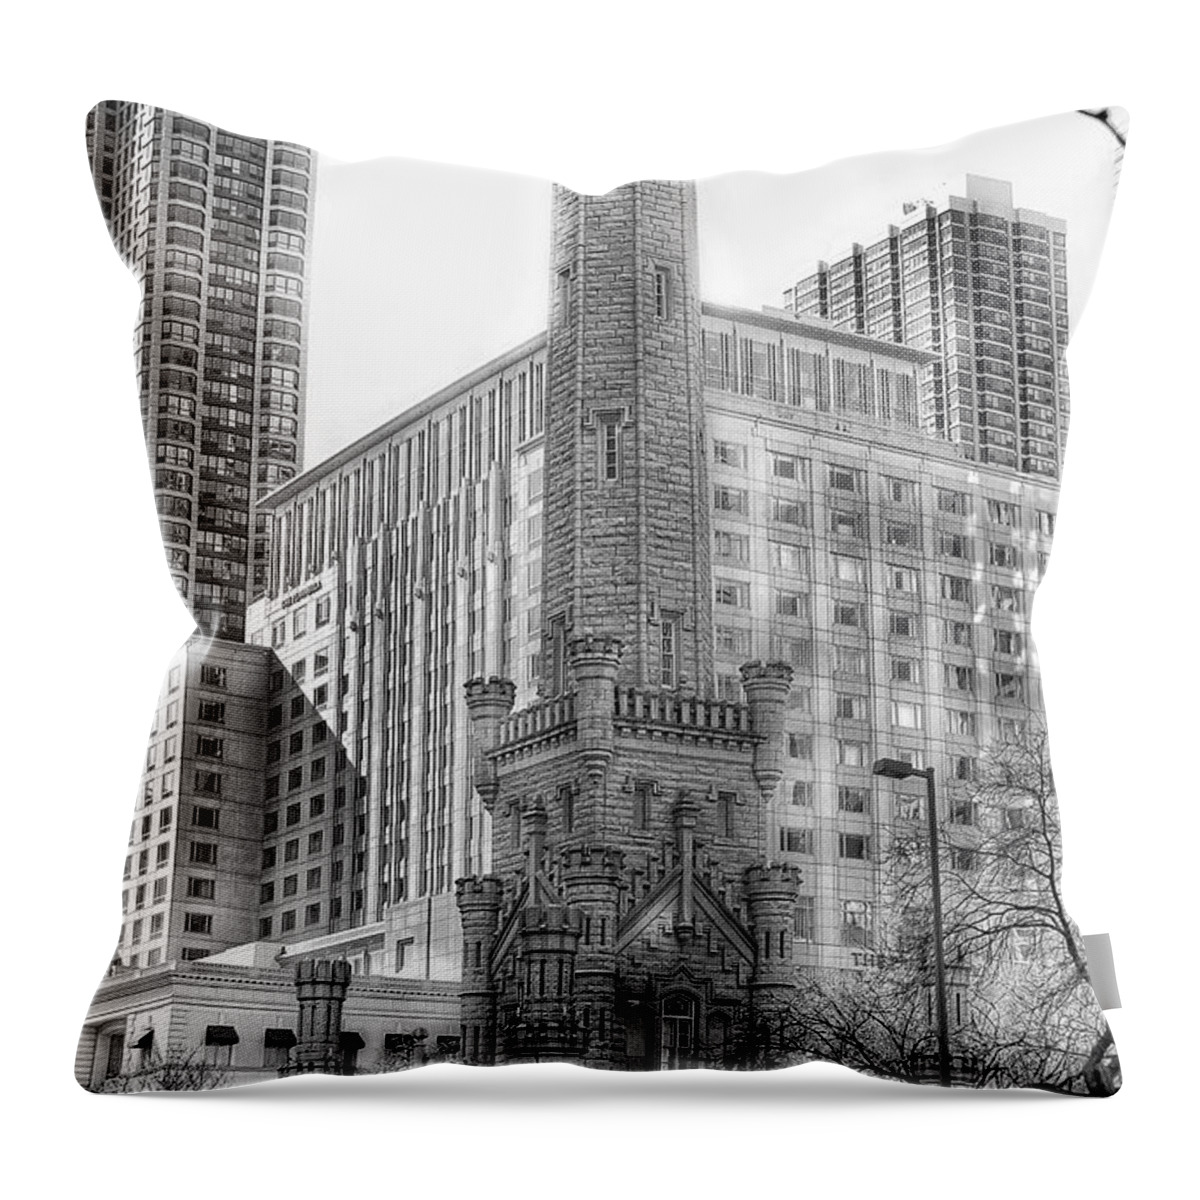 Water Tower Throw Pillow featuring the photograph Old Water Tower - Chicago by Jackson Pearson